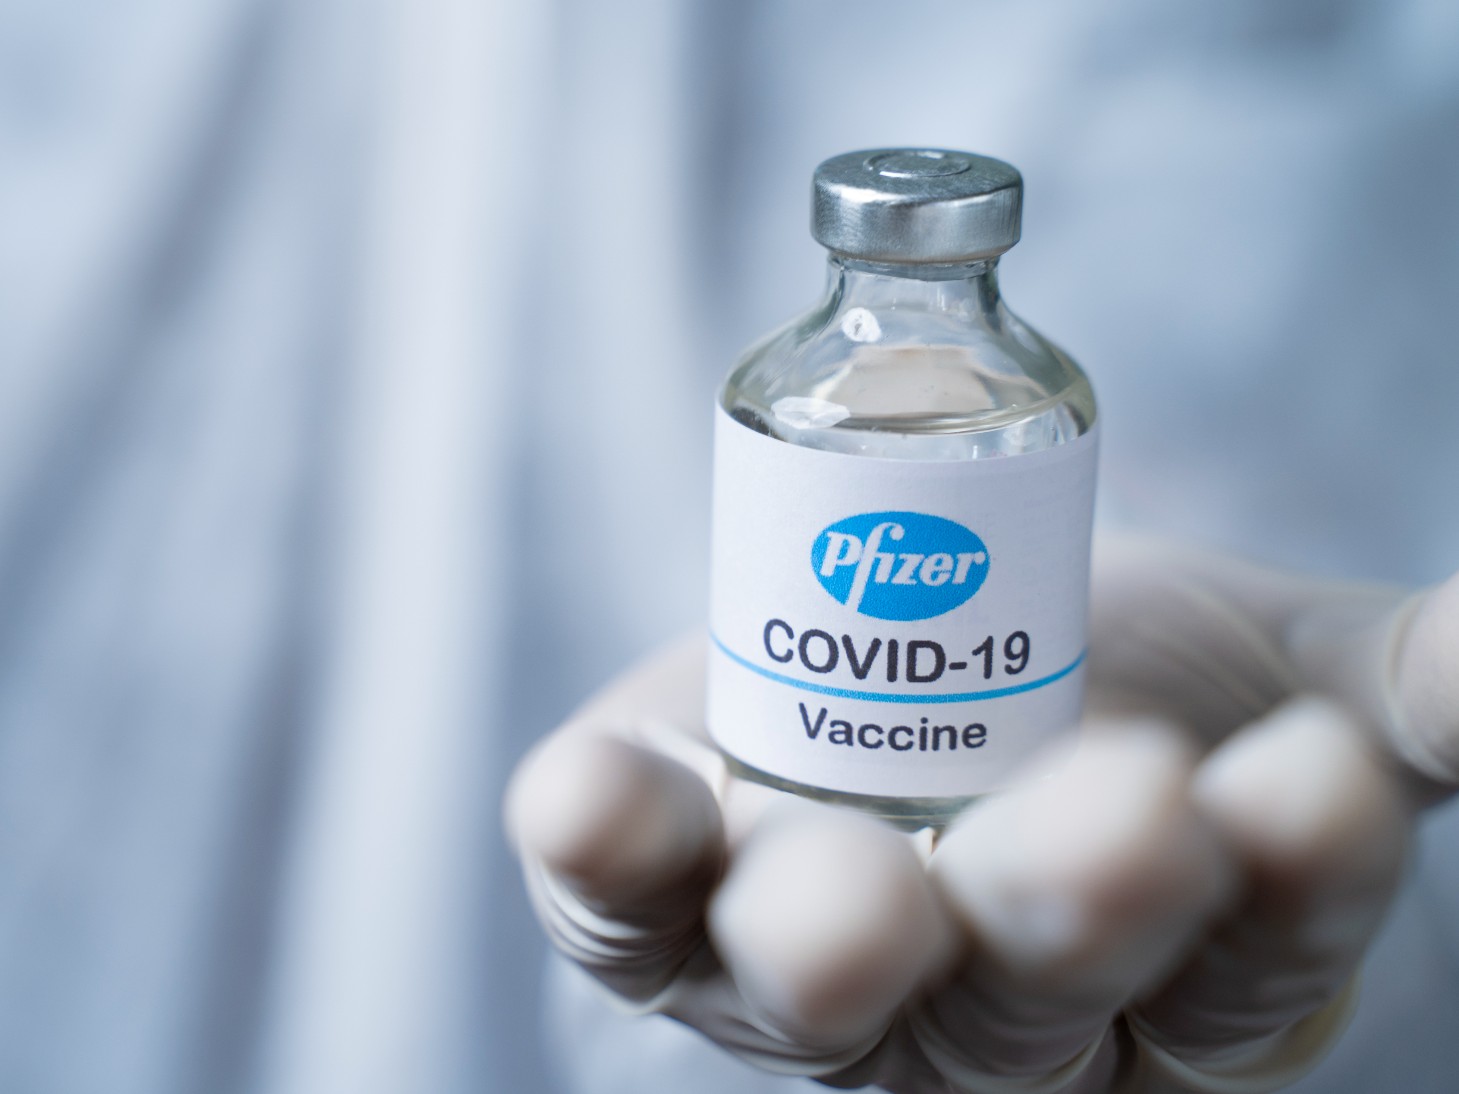 Will Pfizer’s FDA approval spell an uptick in COVID vaccination?